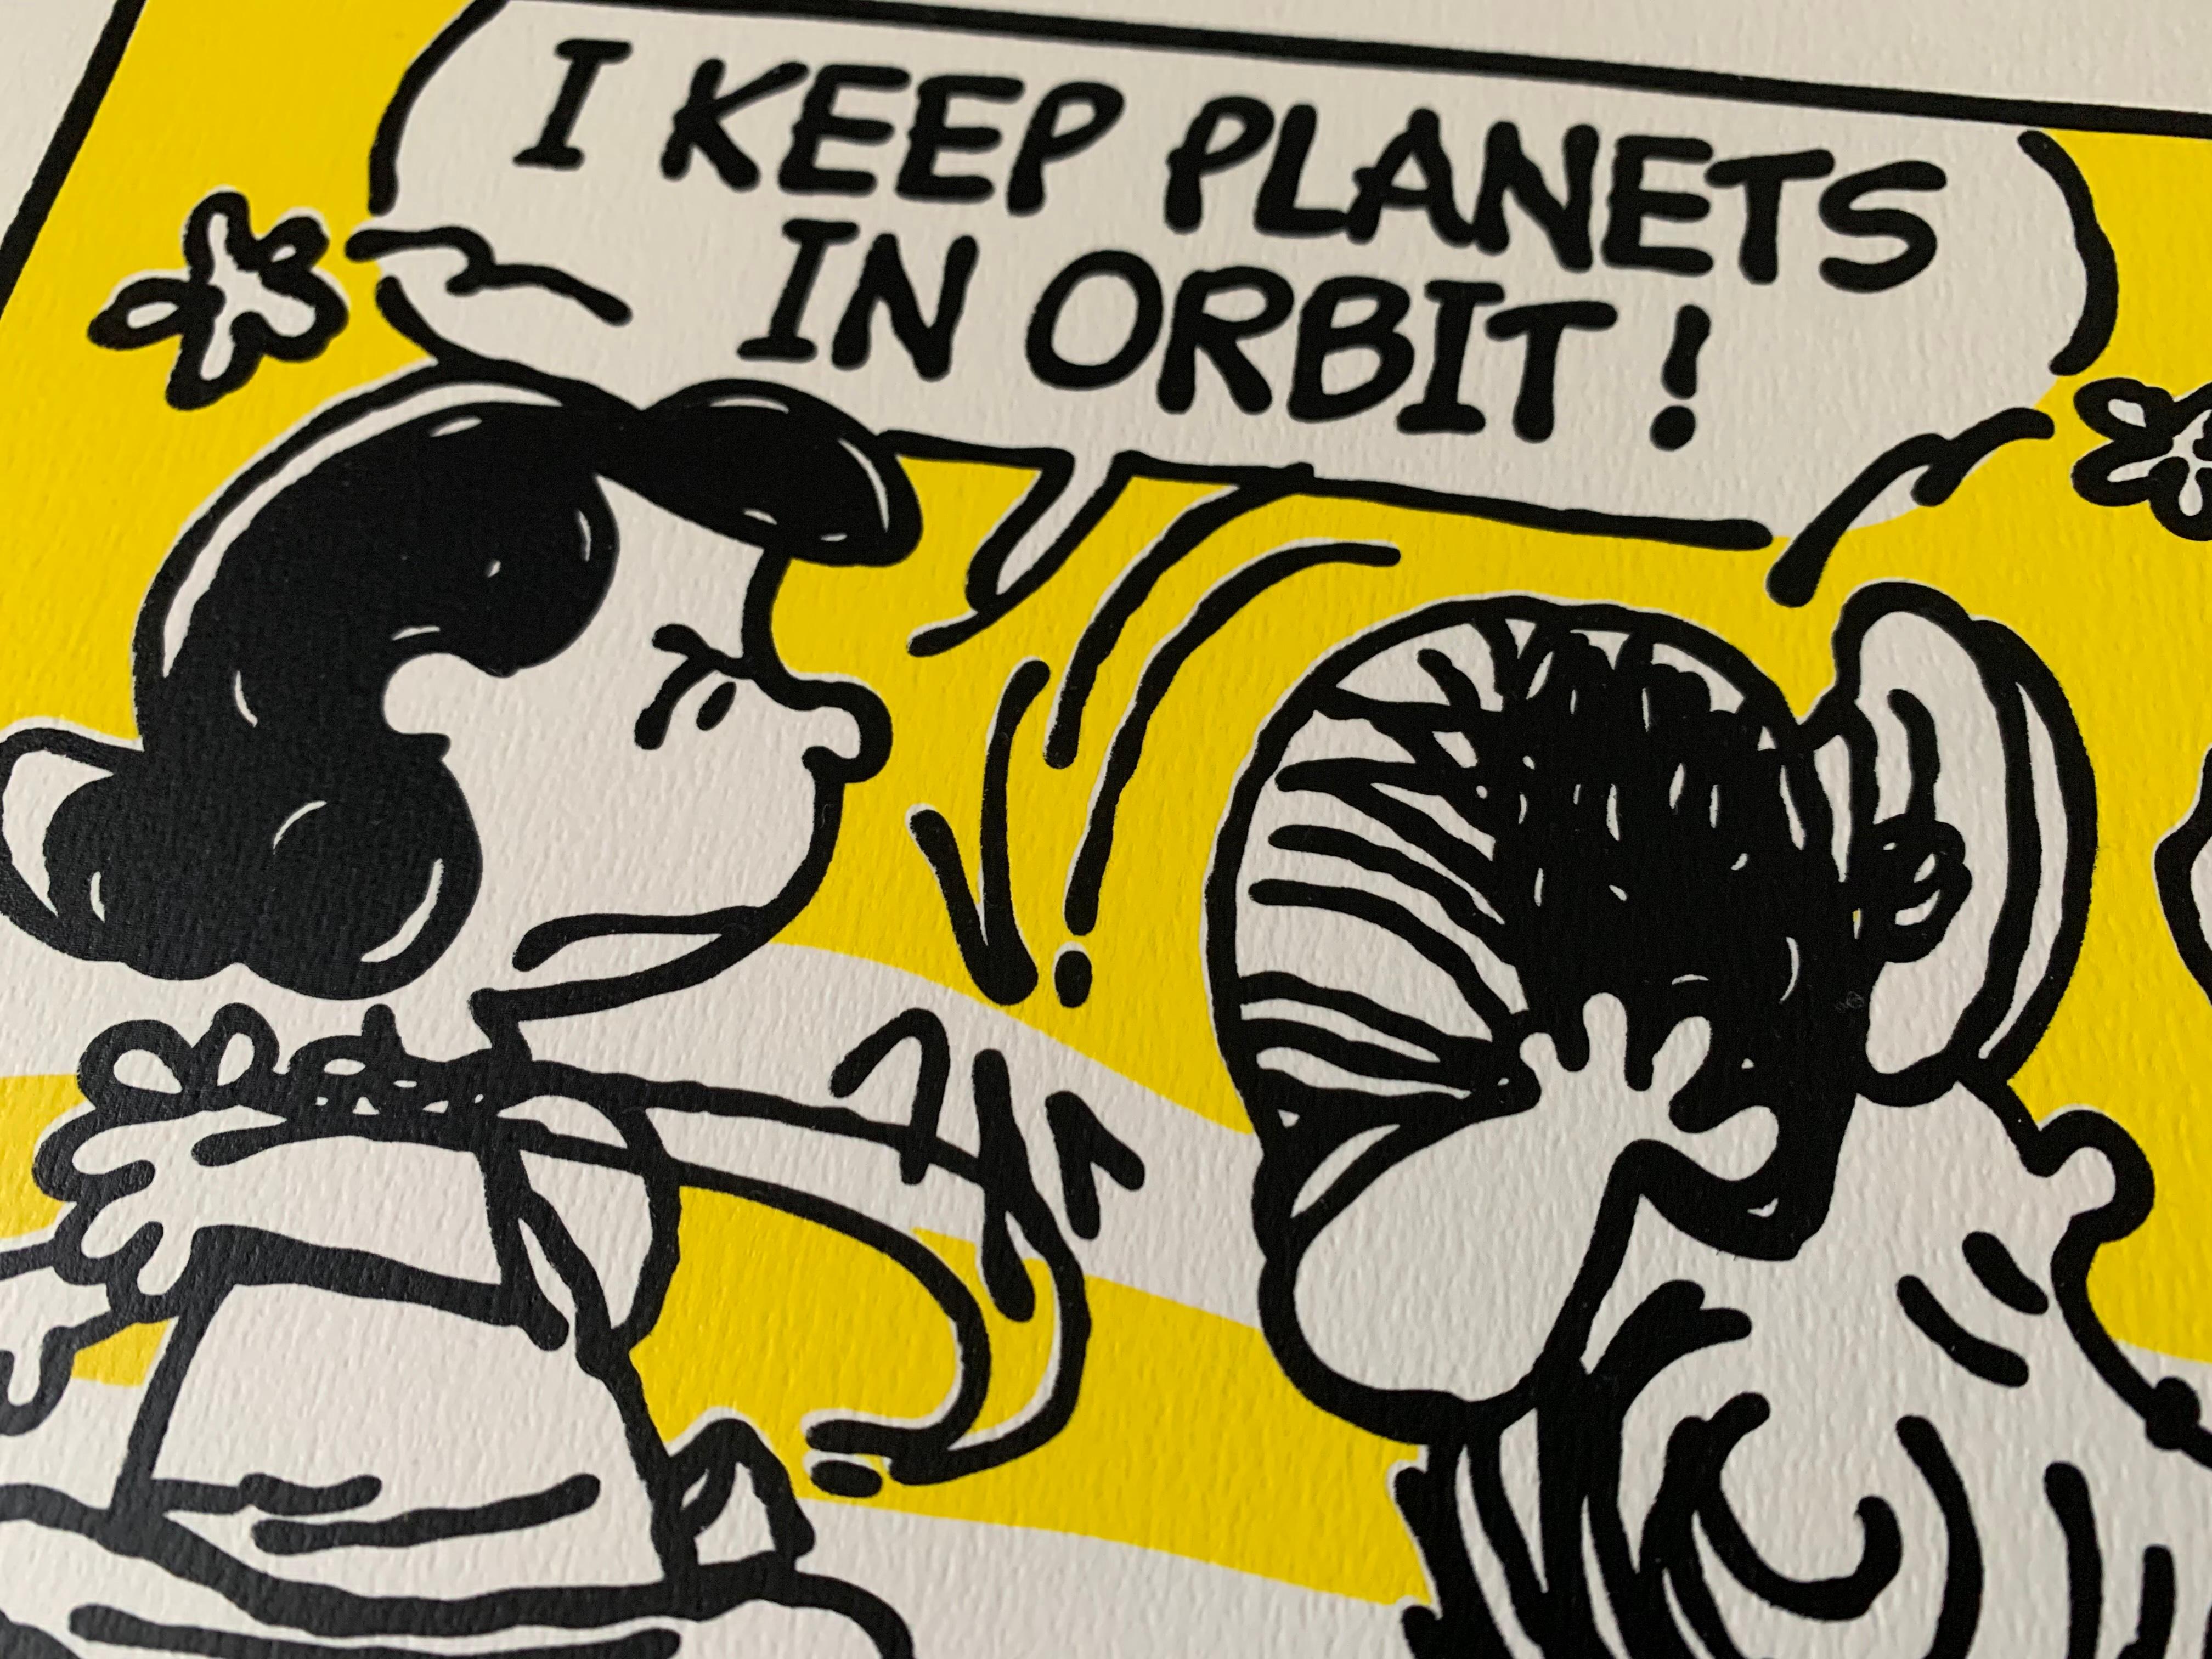 I Keep Planets in Orbit Old Dirty Bastard Signed and Numbered Screenprint 10/100 - Print by Mark Drew